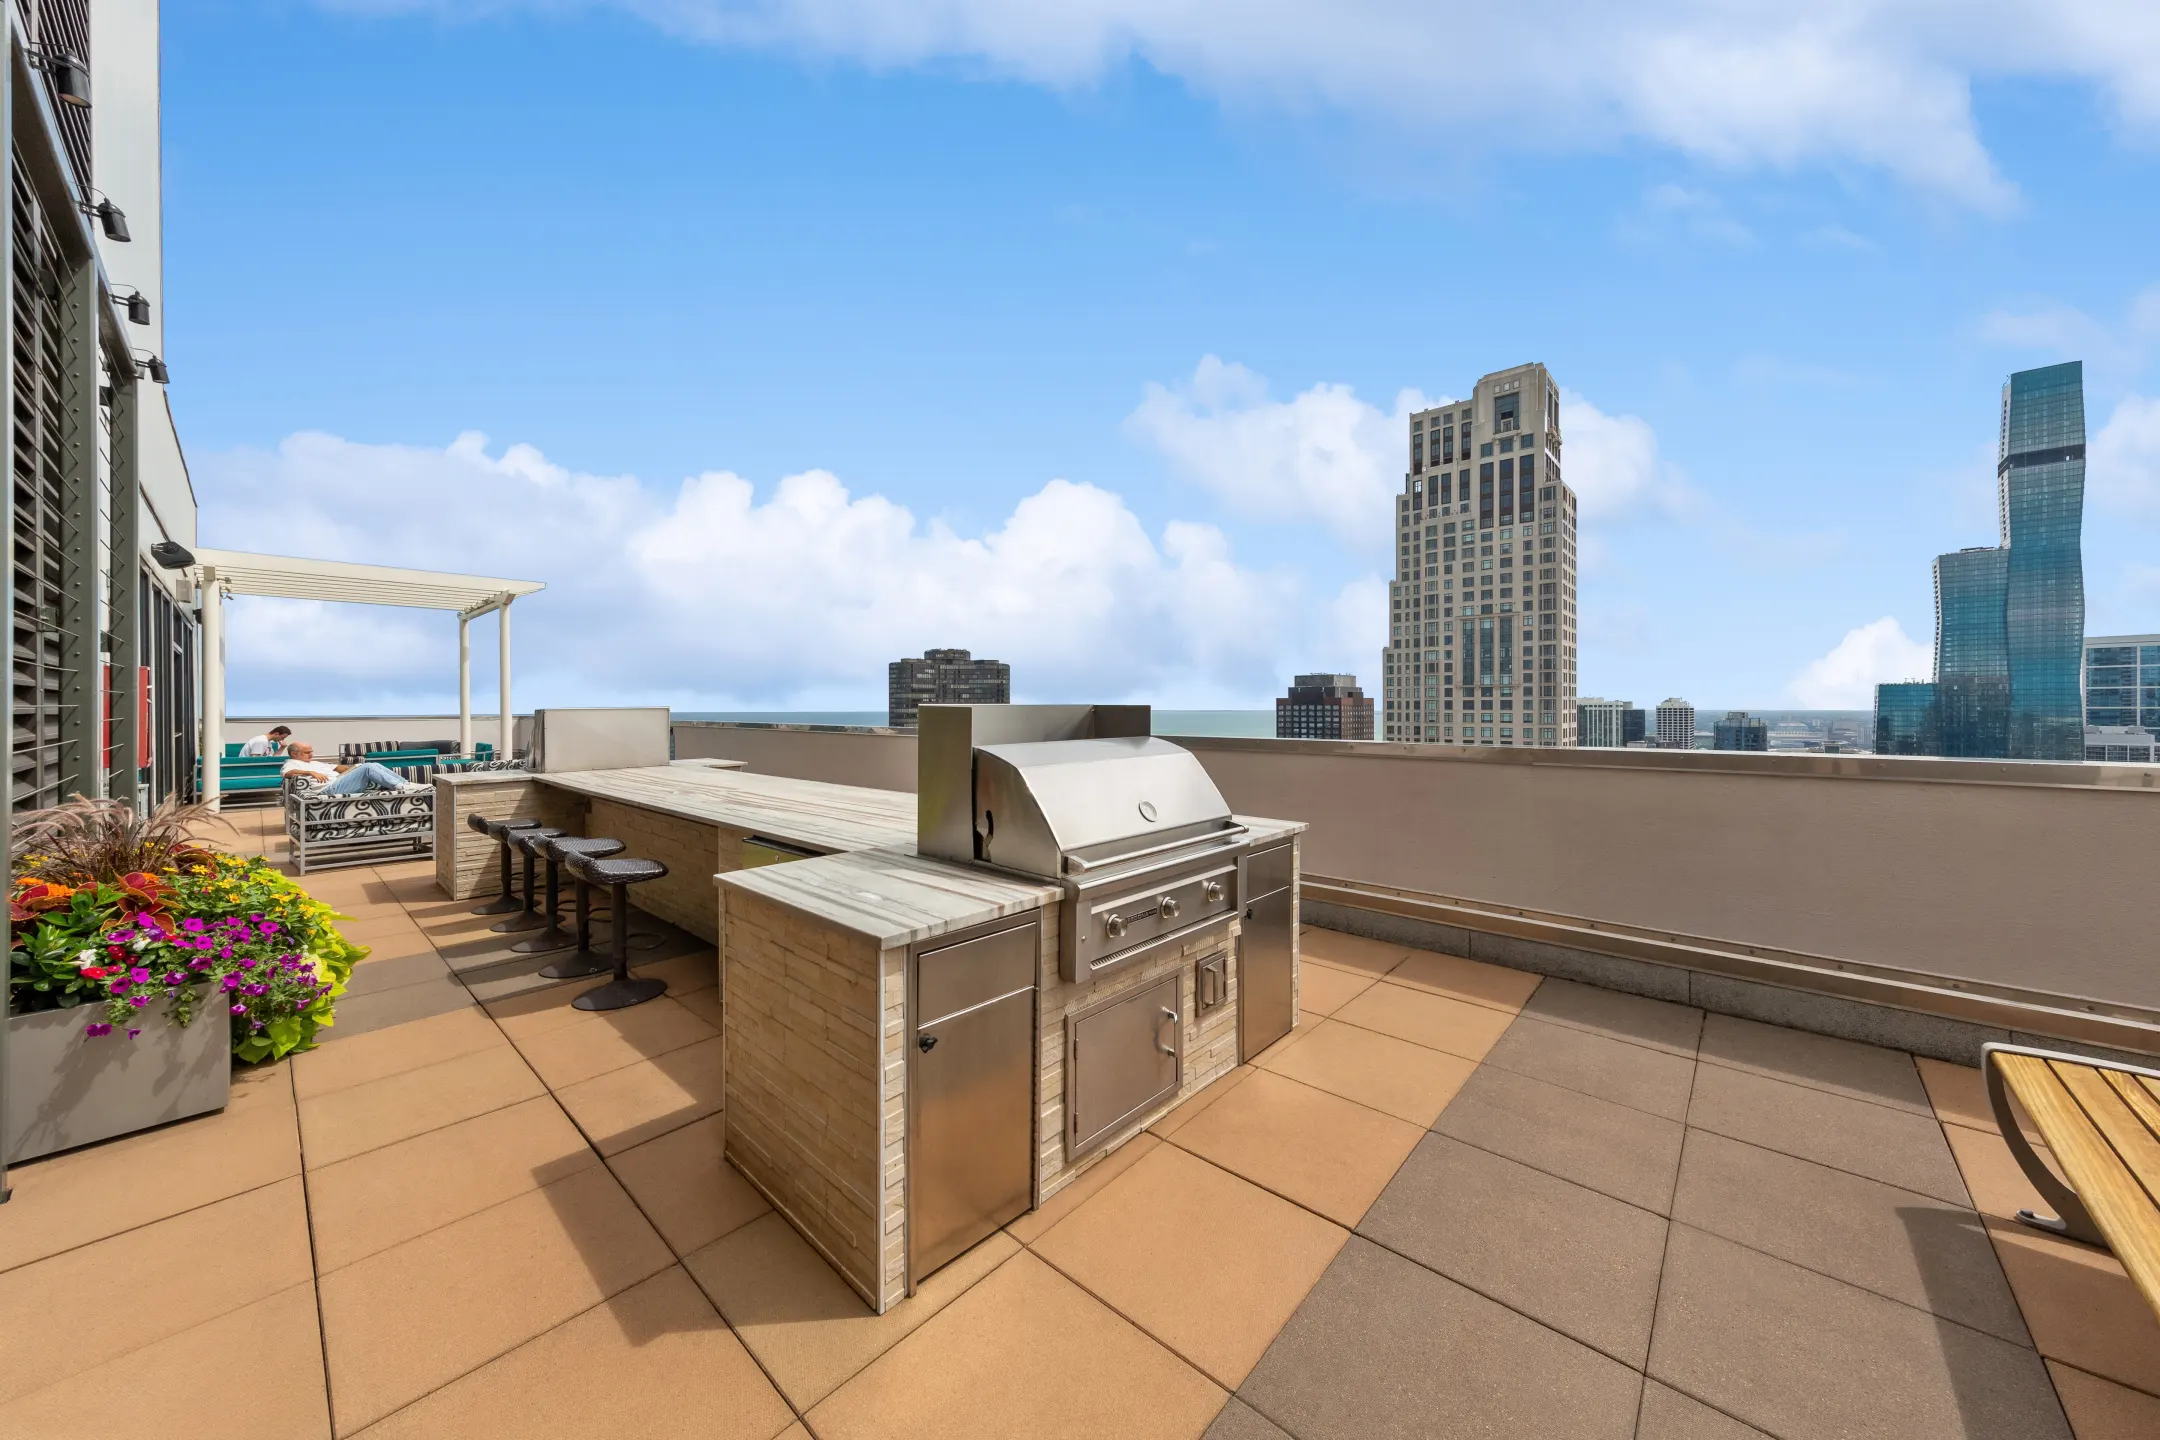 Patio / Deck - Axis Apartments and Lofts - Chicago, IL